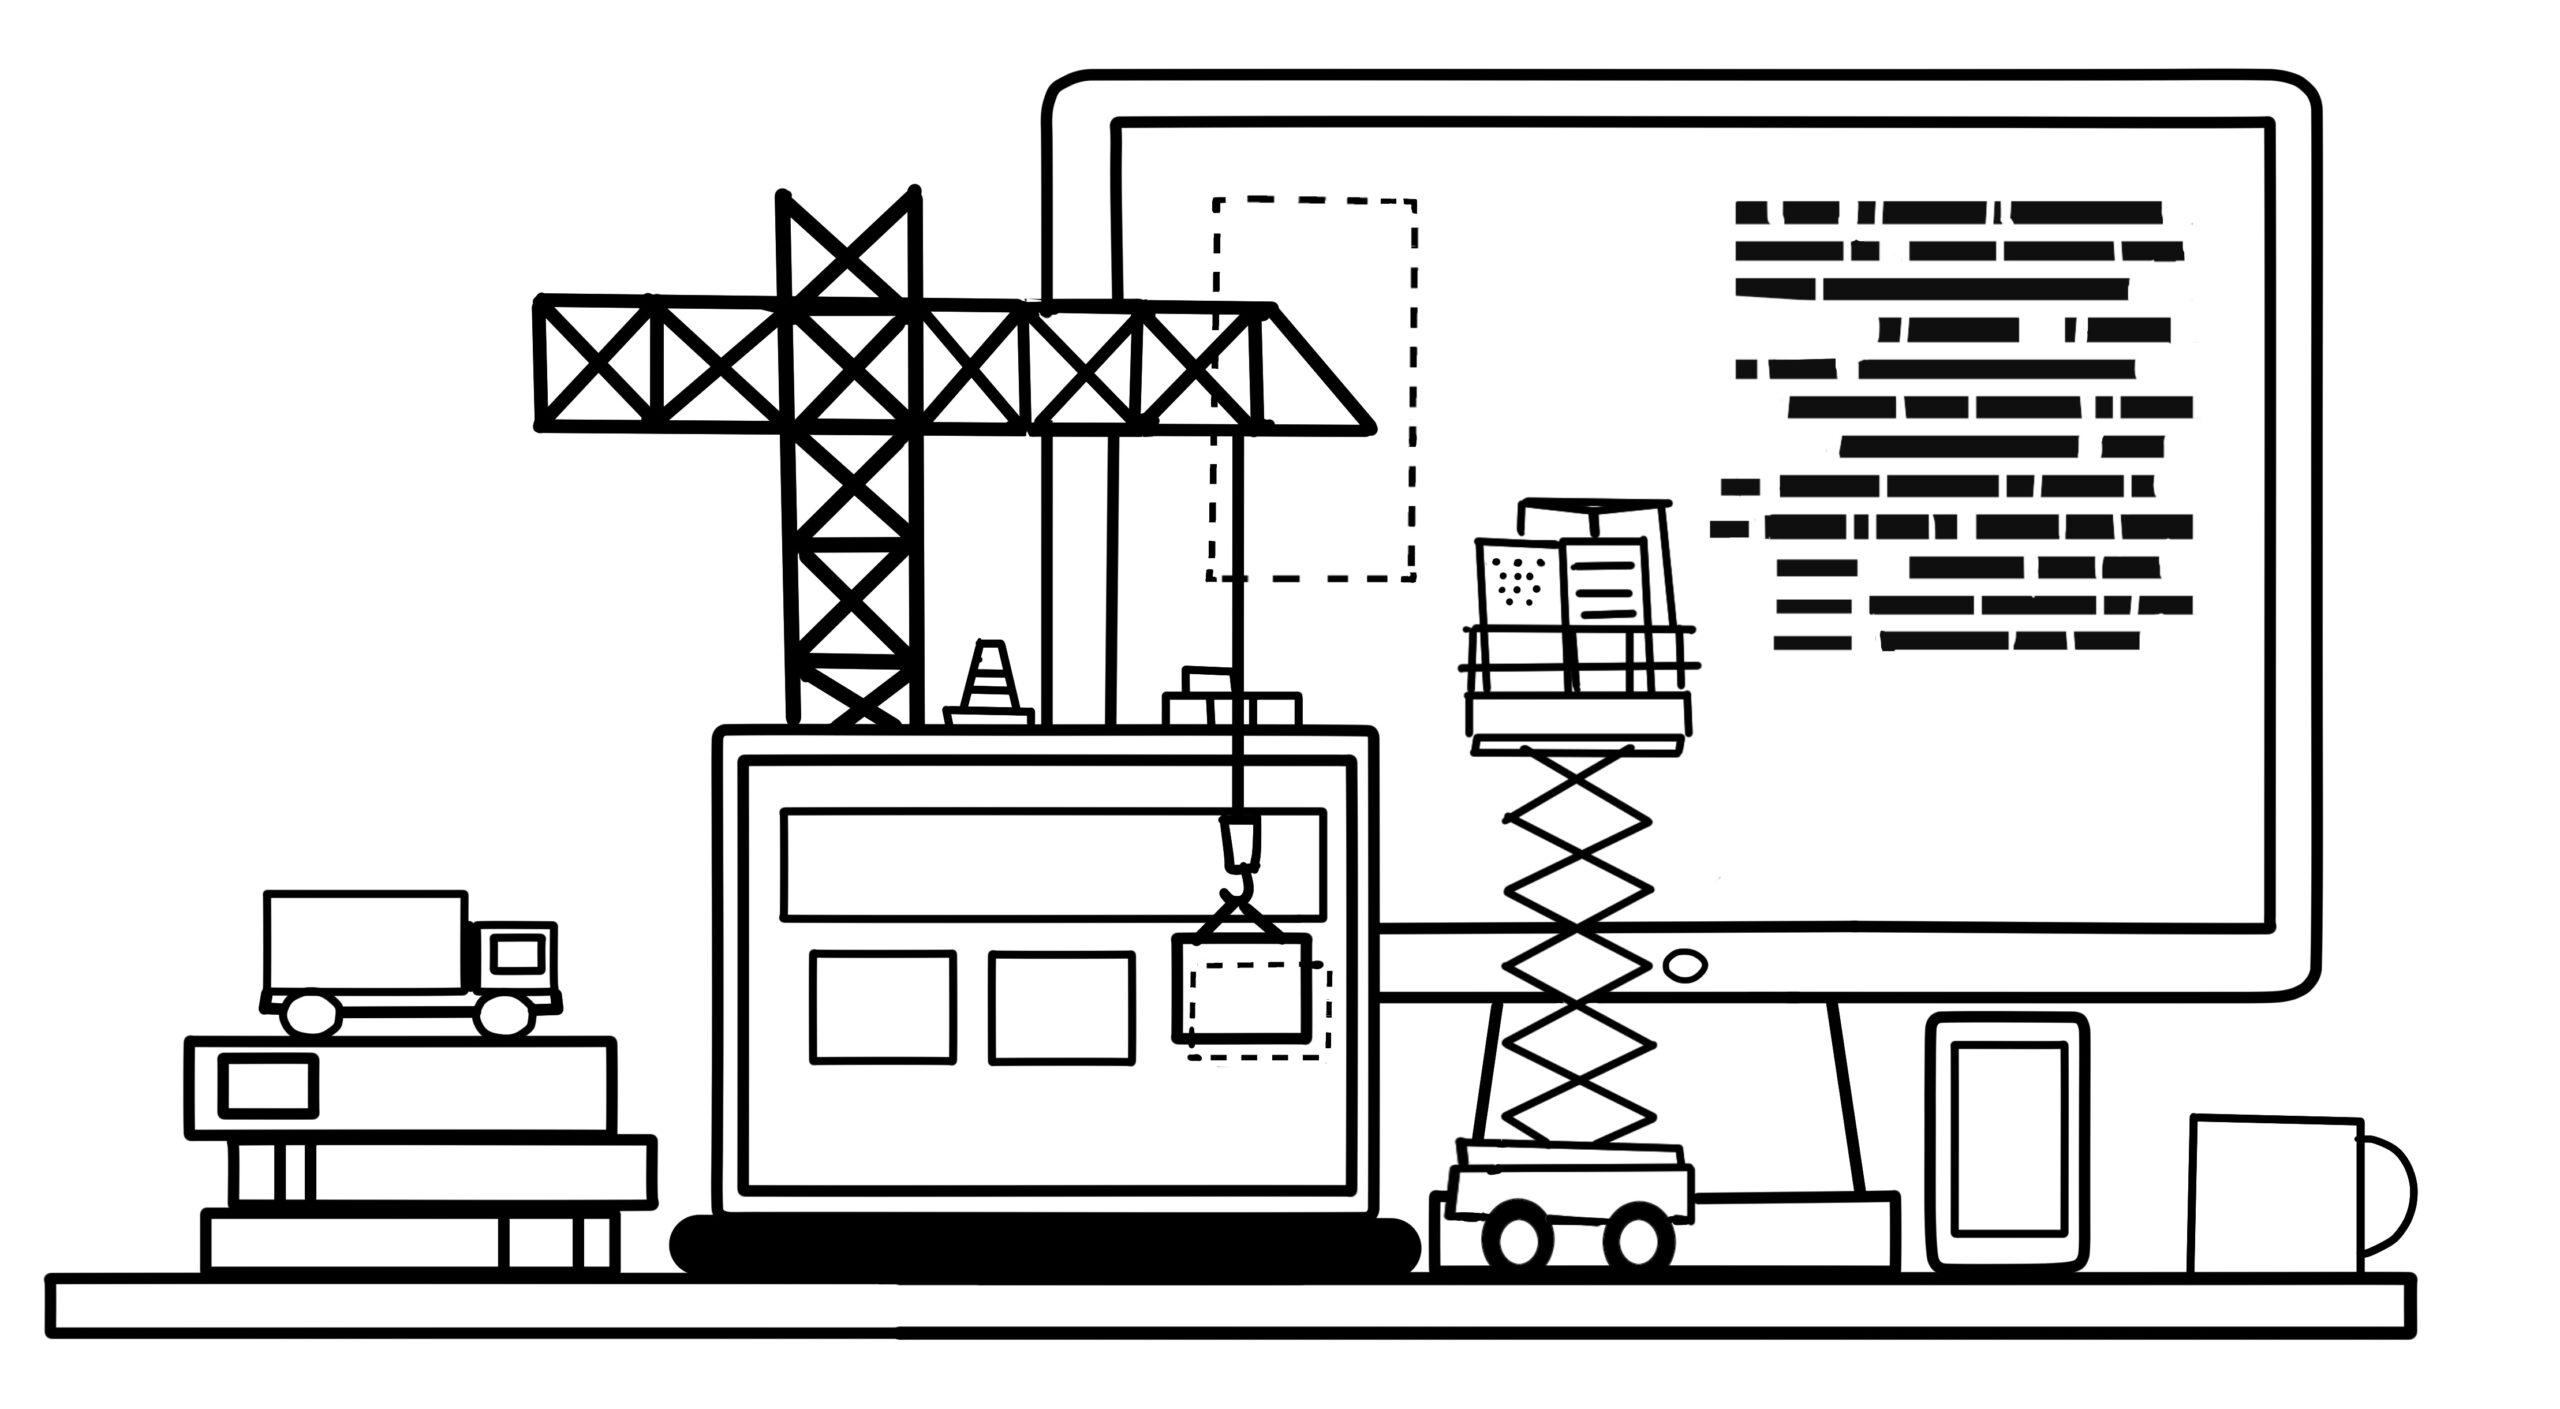 Construction equipment in front of a computer screen implying website building. To the left is a pile of books. To the right is a mug on the edge of a desk. The screen has indistinguishable lines of text.